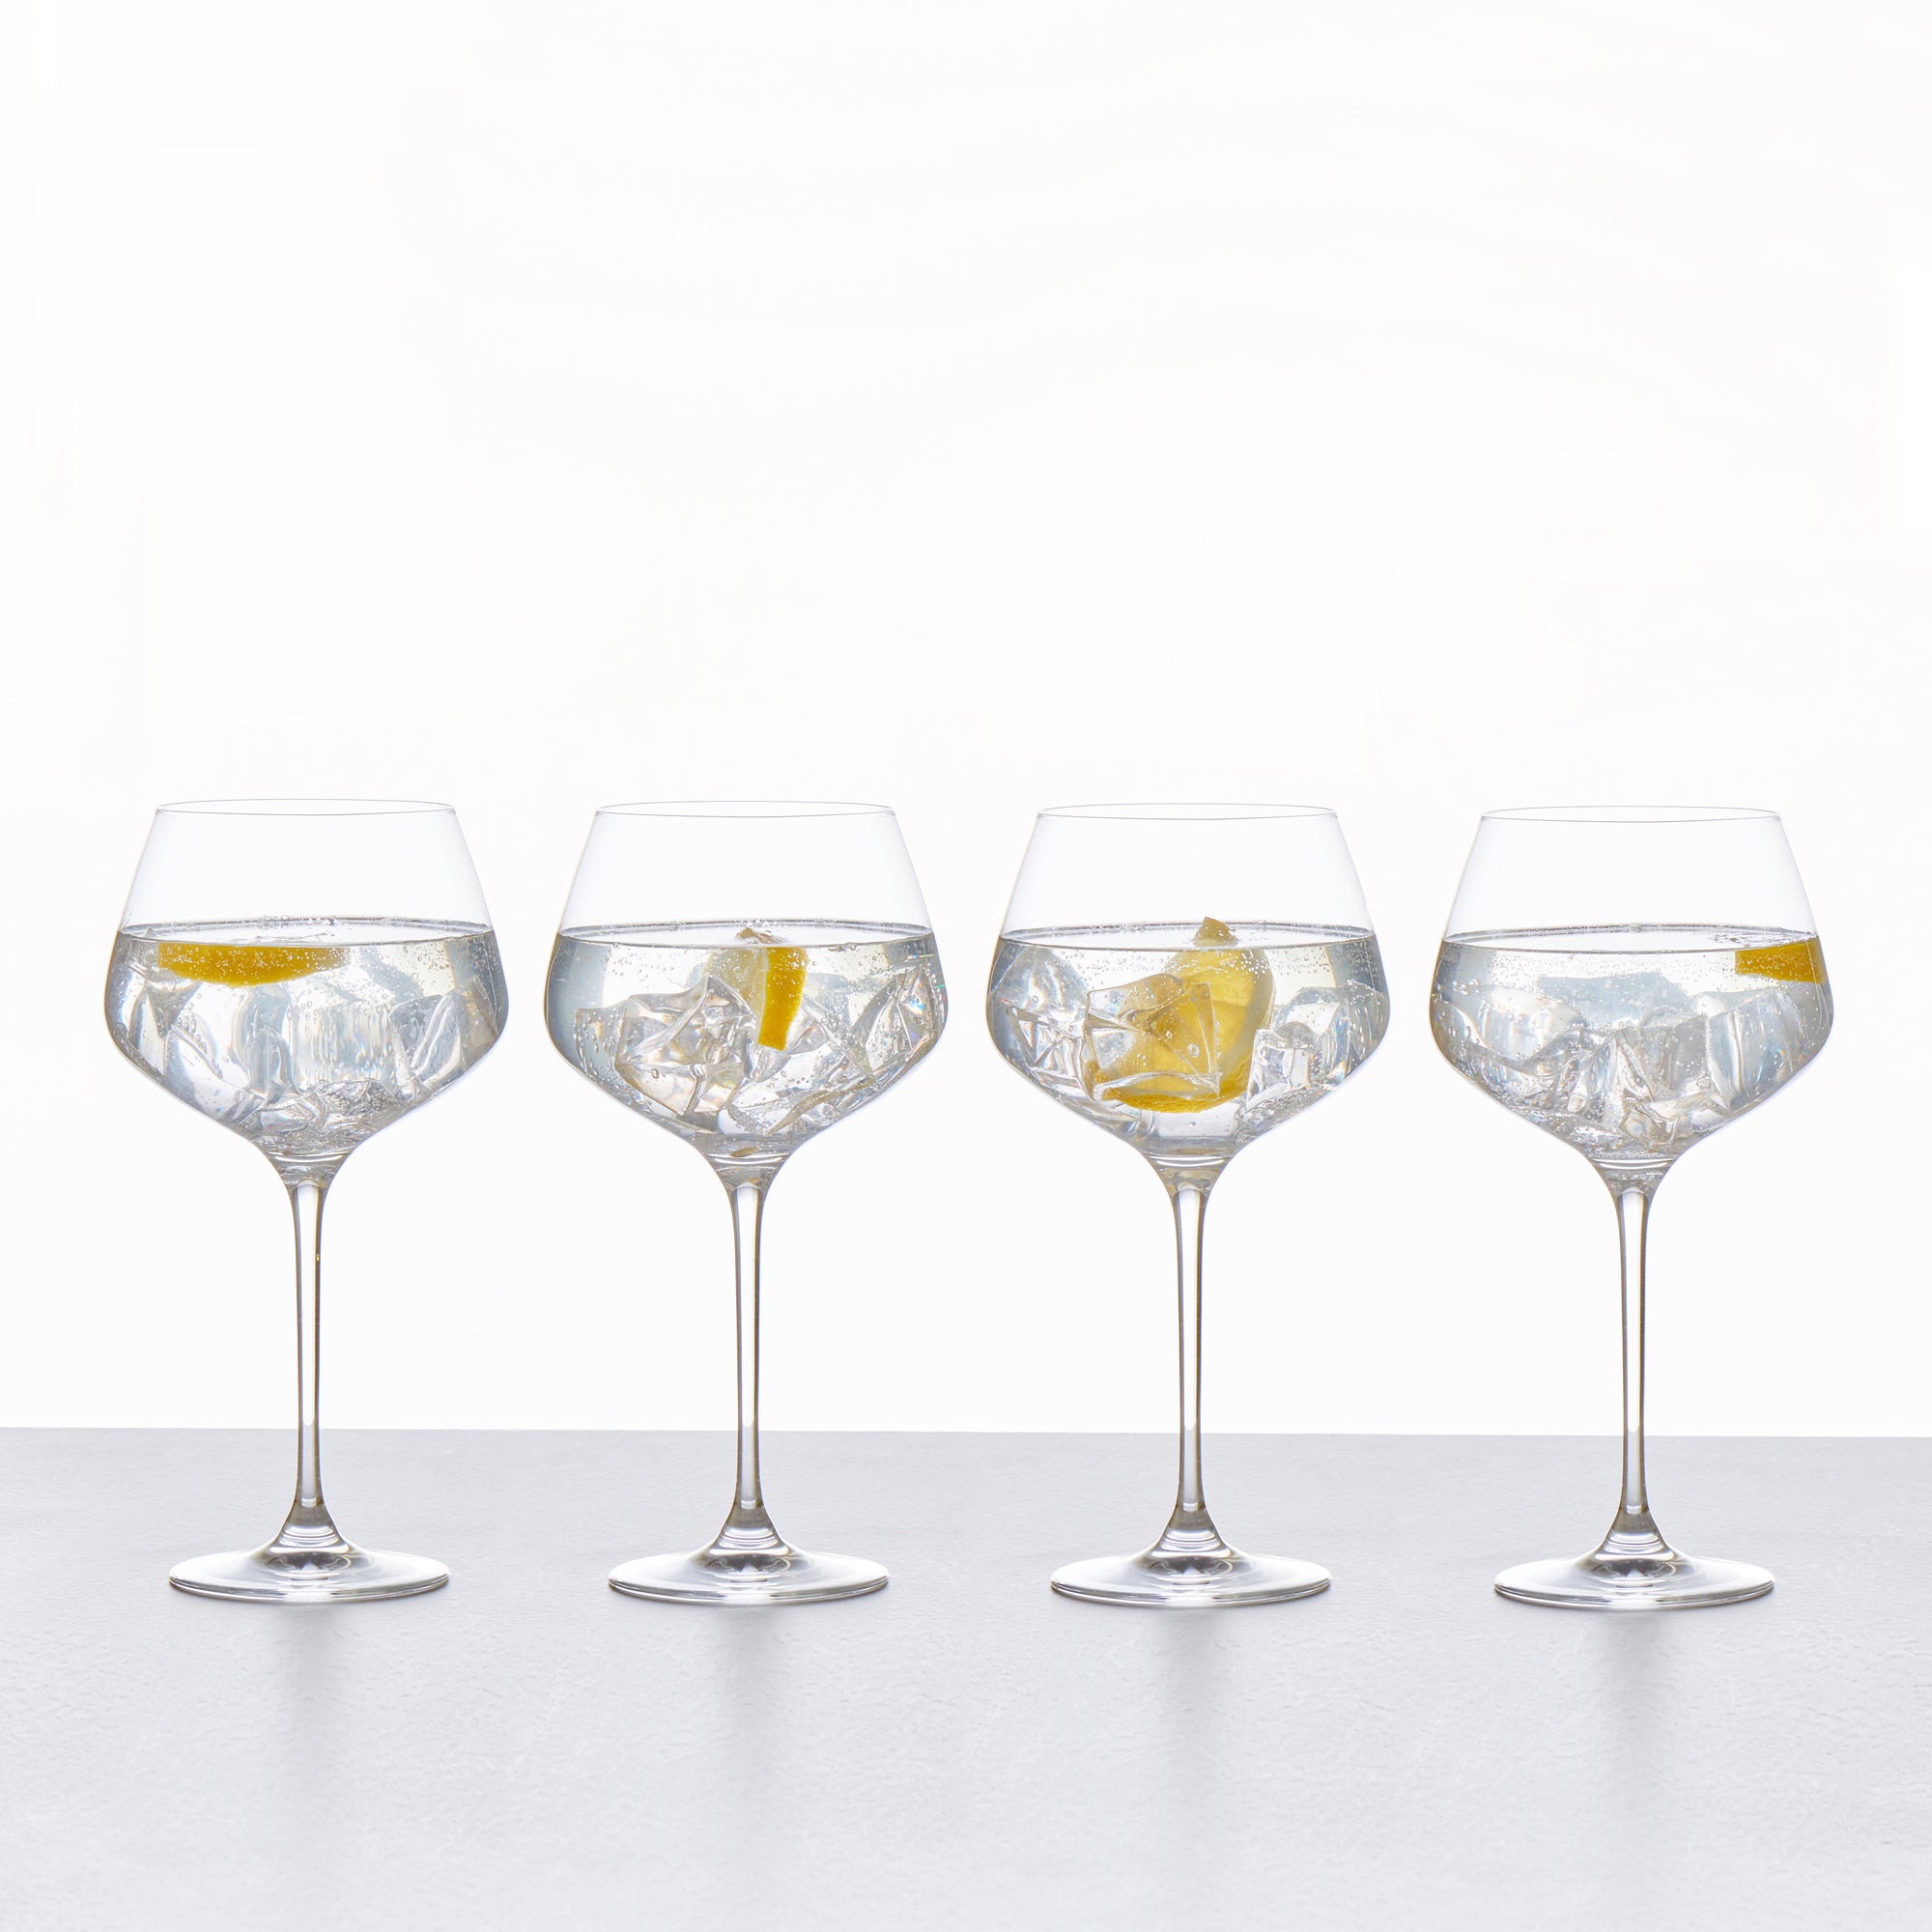 Set of 4 Connoisseur Crystal Glass Gin Glasses